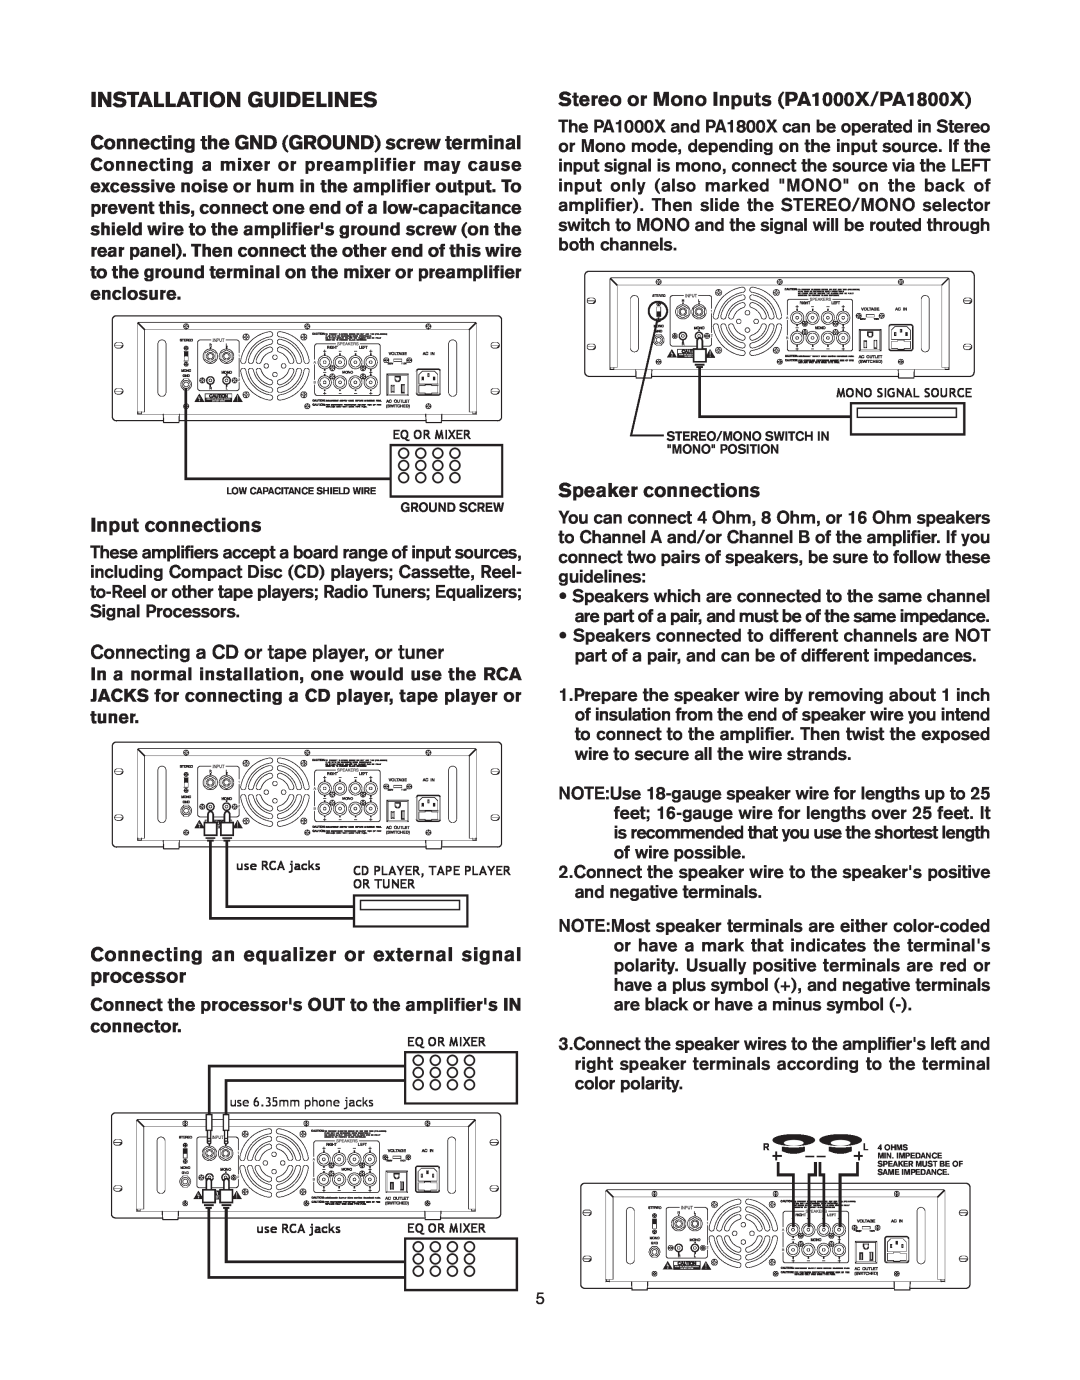 Pyramid Car Audio PA1800X, PA800X Installation Guidelines, Connecting the GND GROUND screw terminal, Input connections 